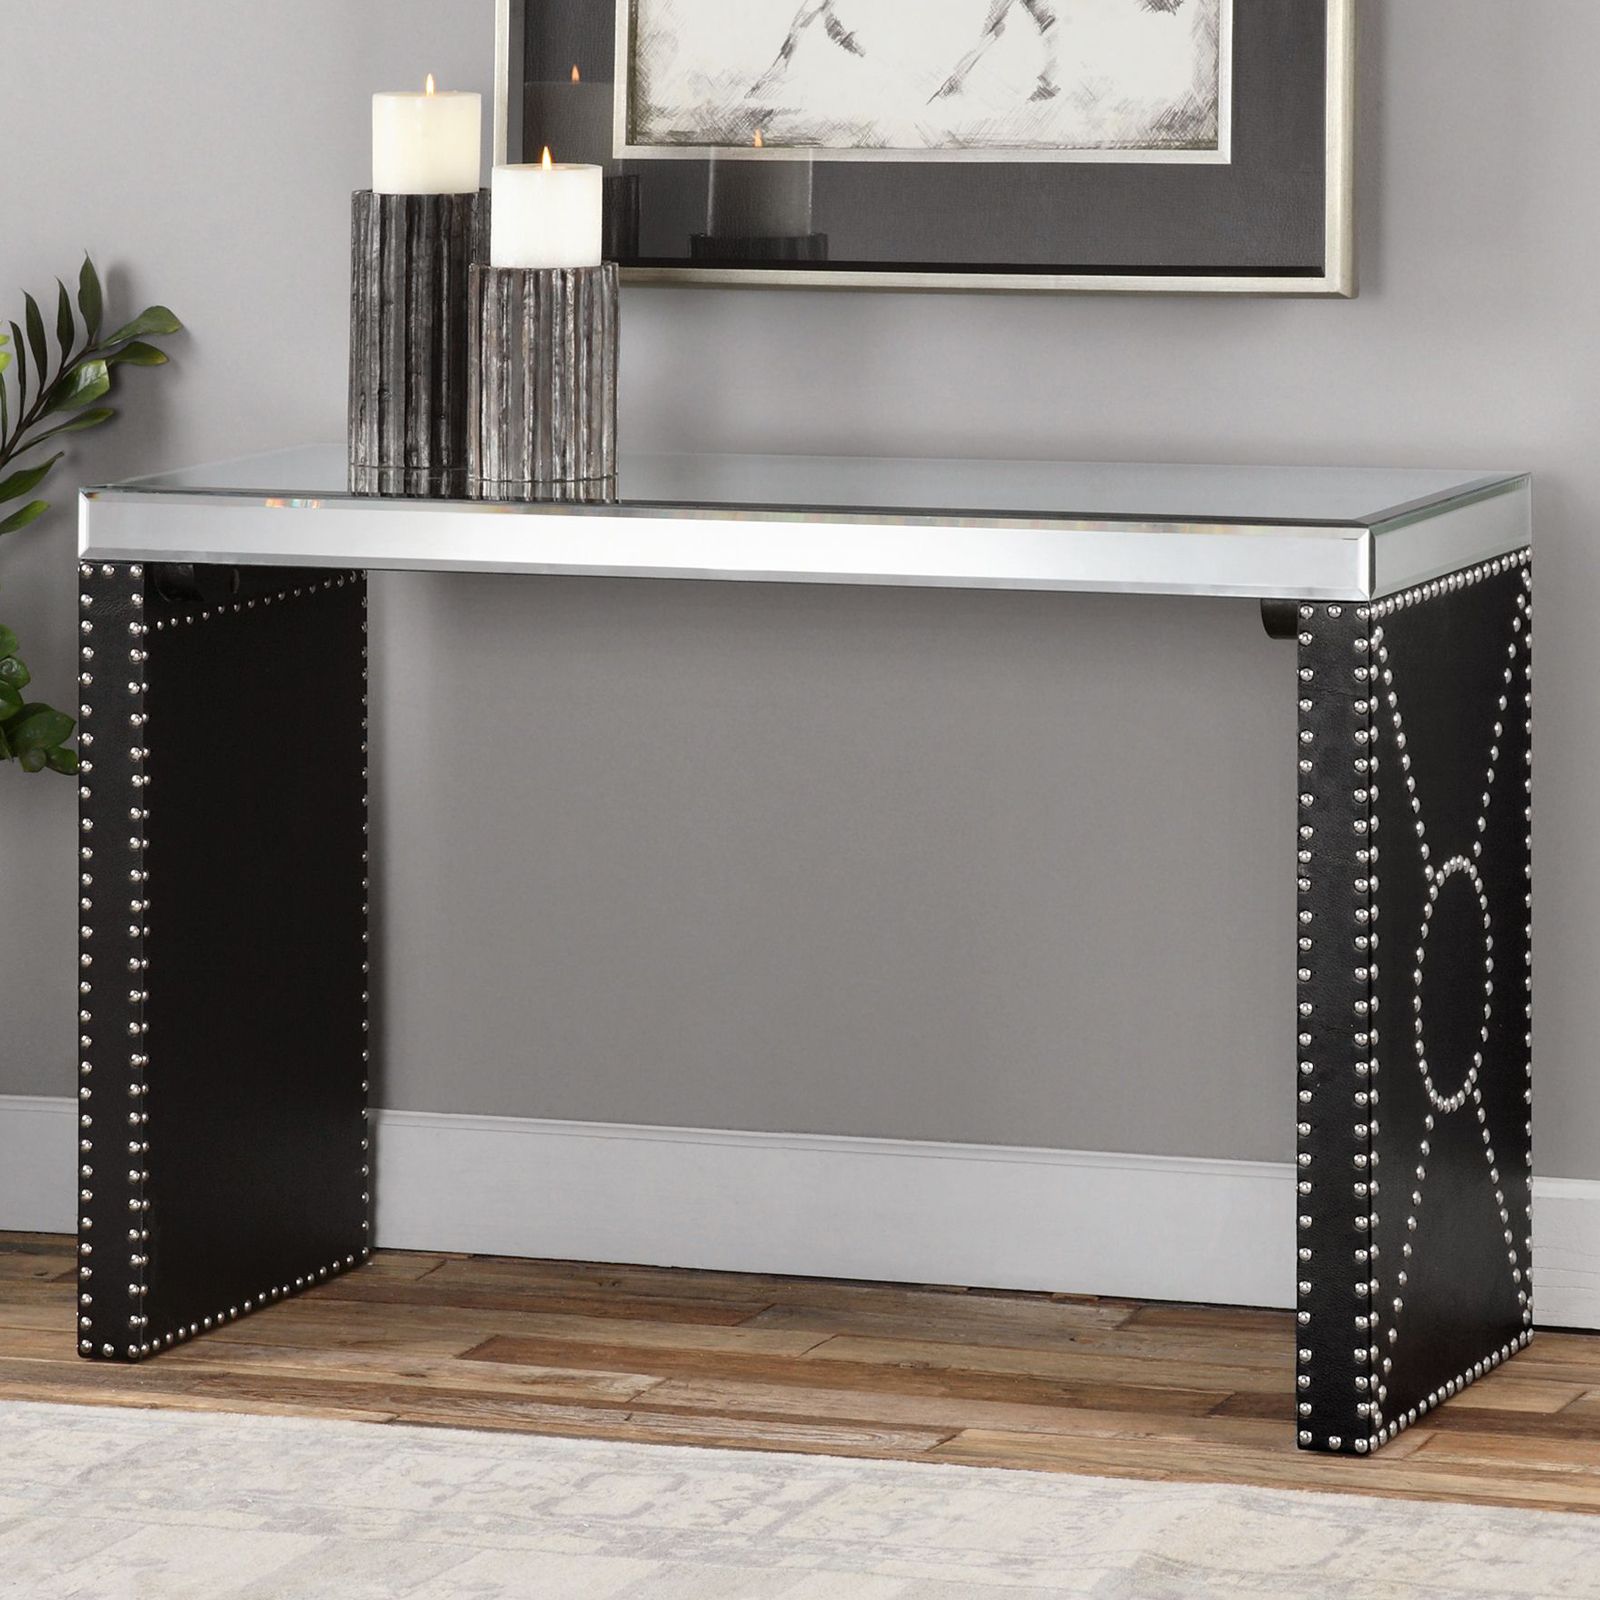 Uttermost Lucero Mirrored Sofa Table – Console Tables At Hayneedle Pertaining To Mirrored Console Tables (View 10 of 20)